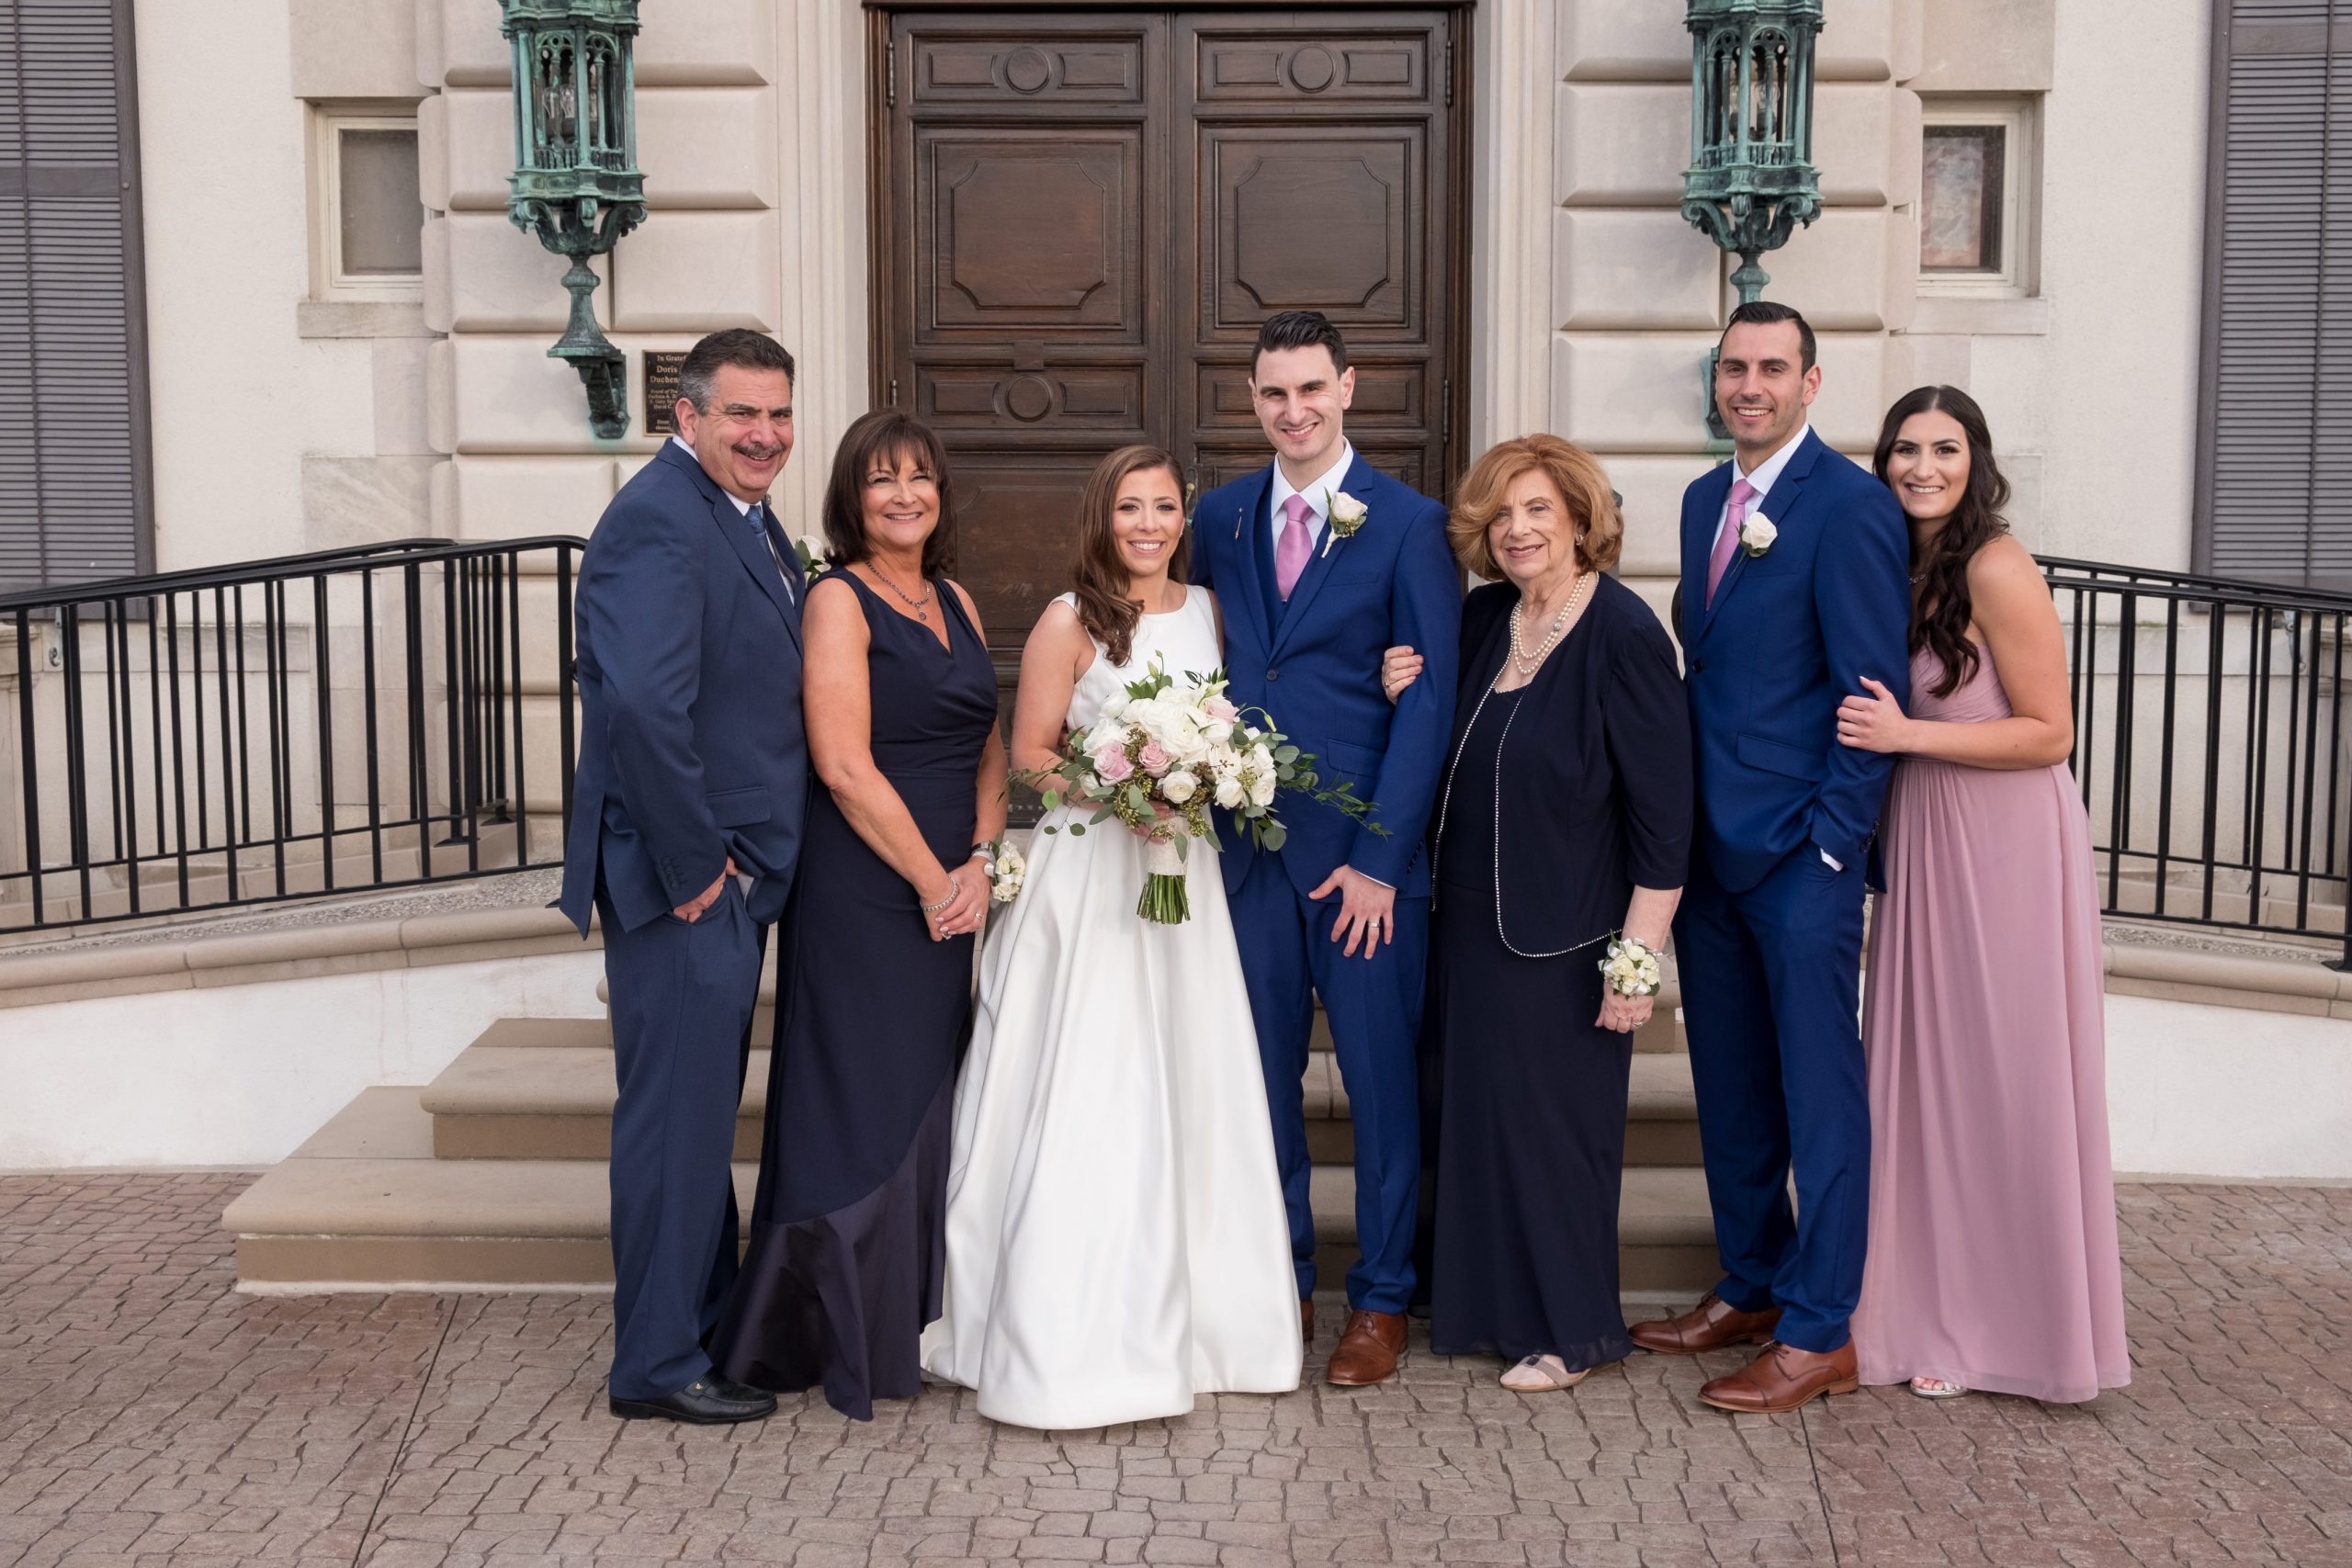 family formal wedding photos at ceremony site